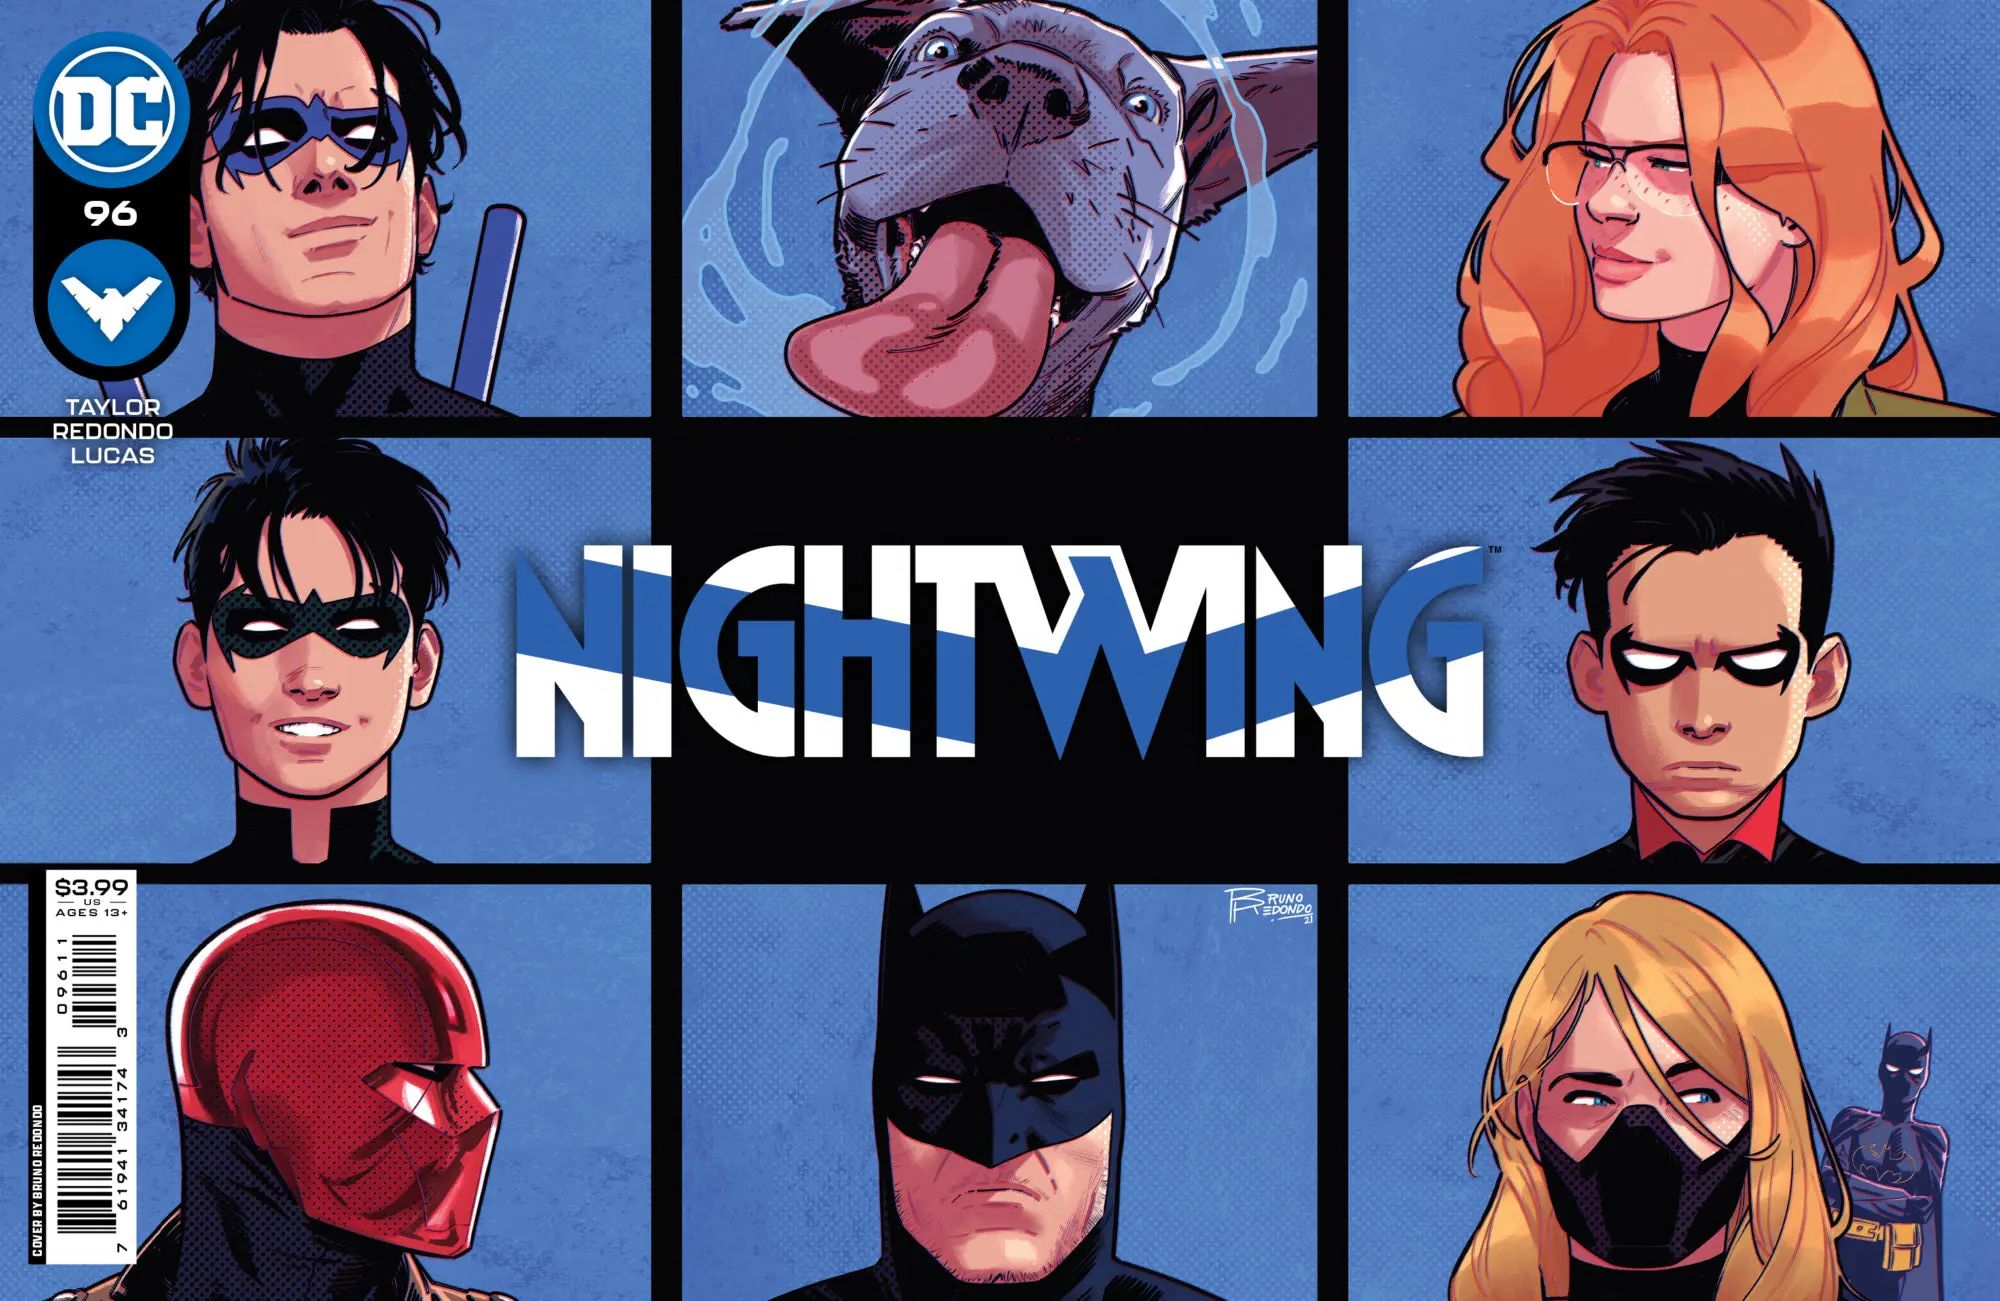 Dick Grayson Battles Blockbuster in DC's Nightwing #96 (Review)